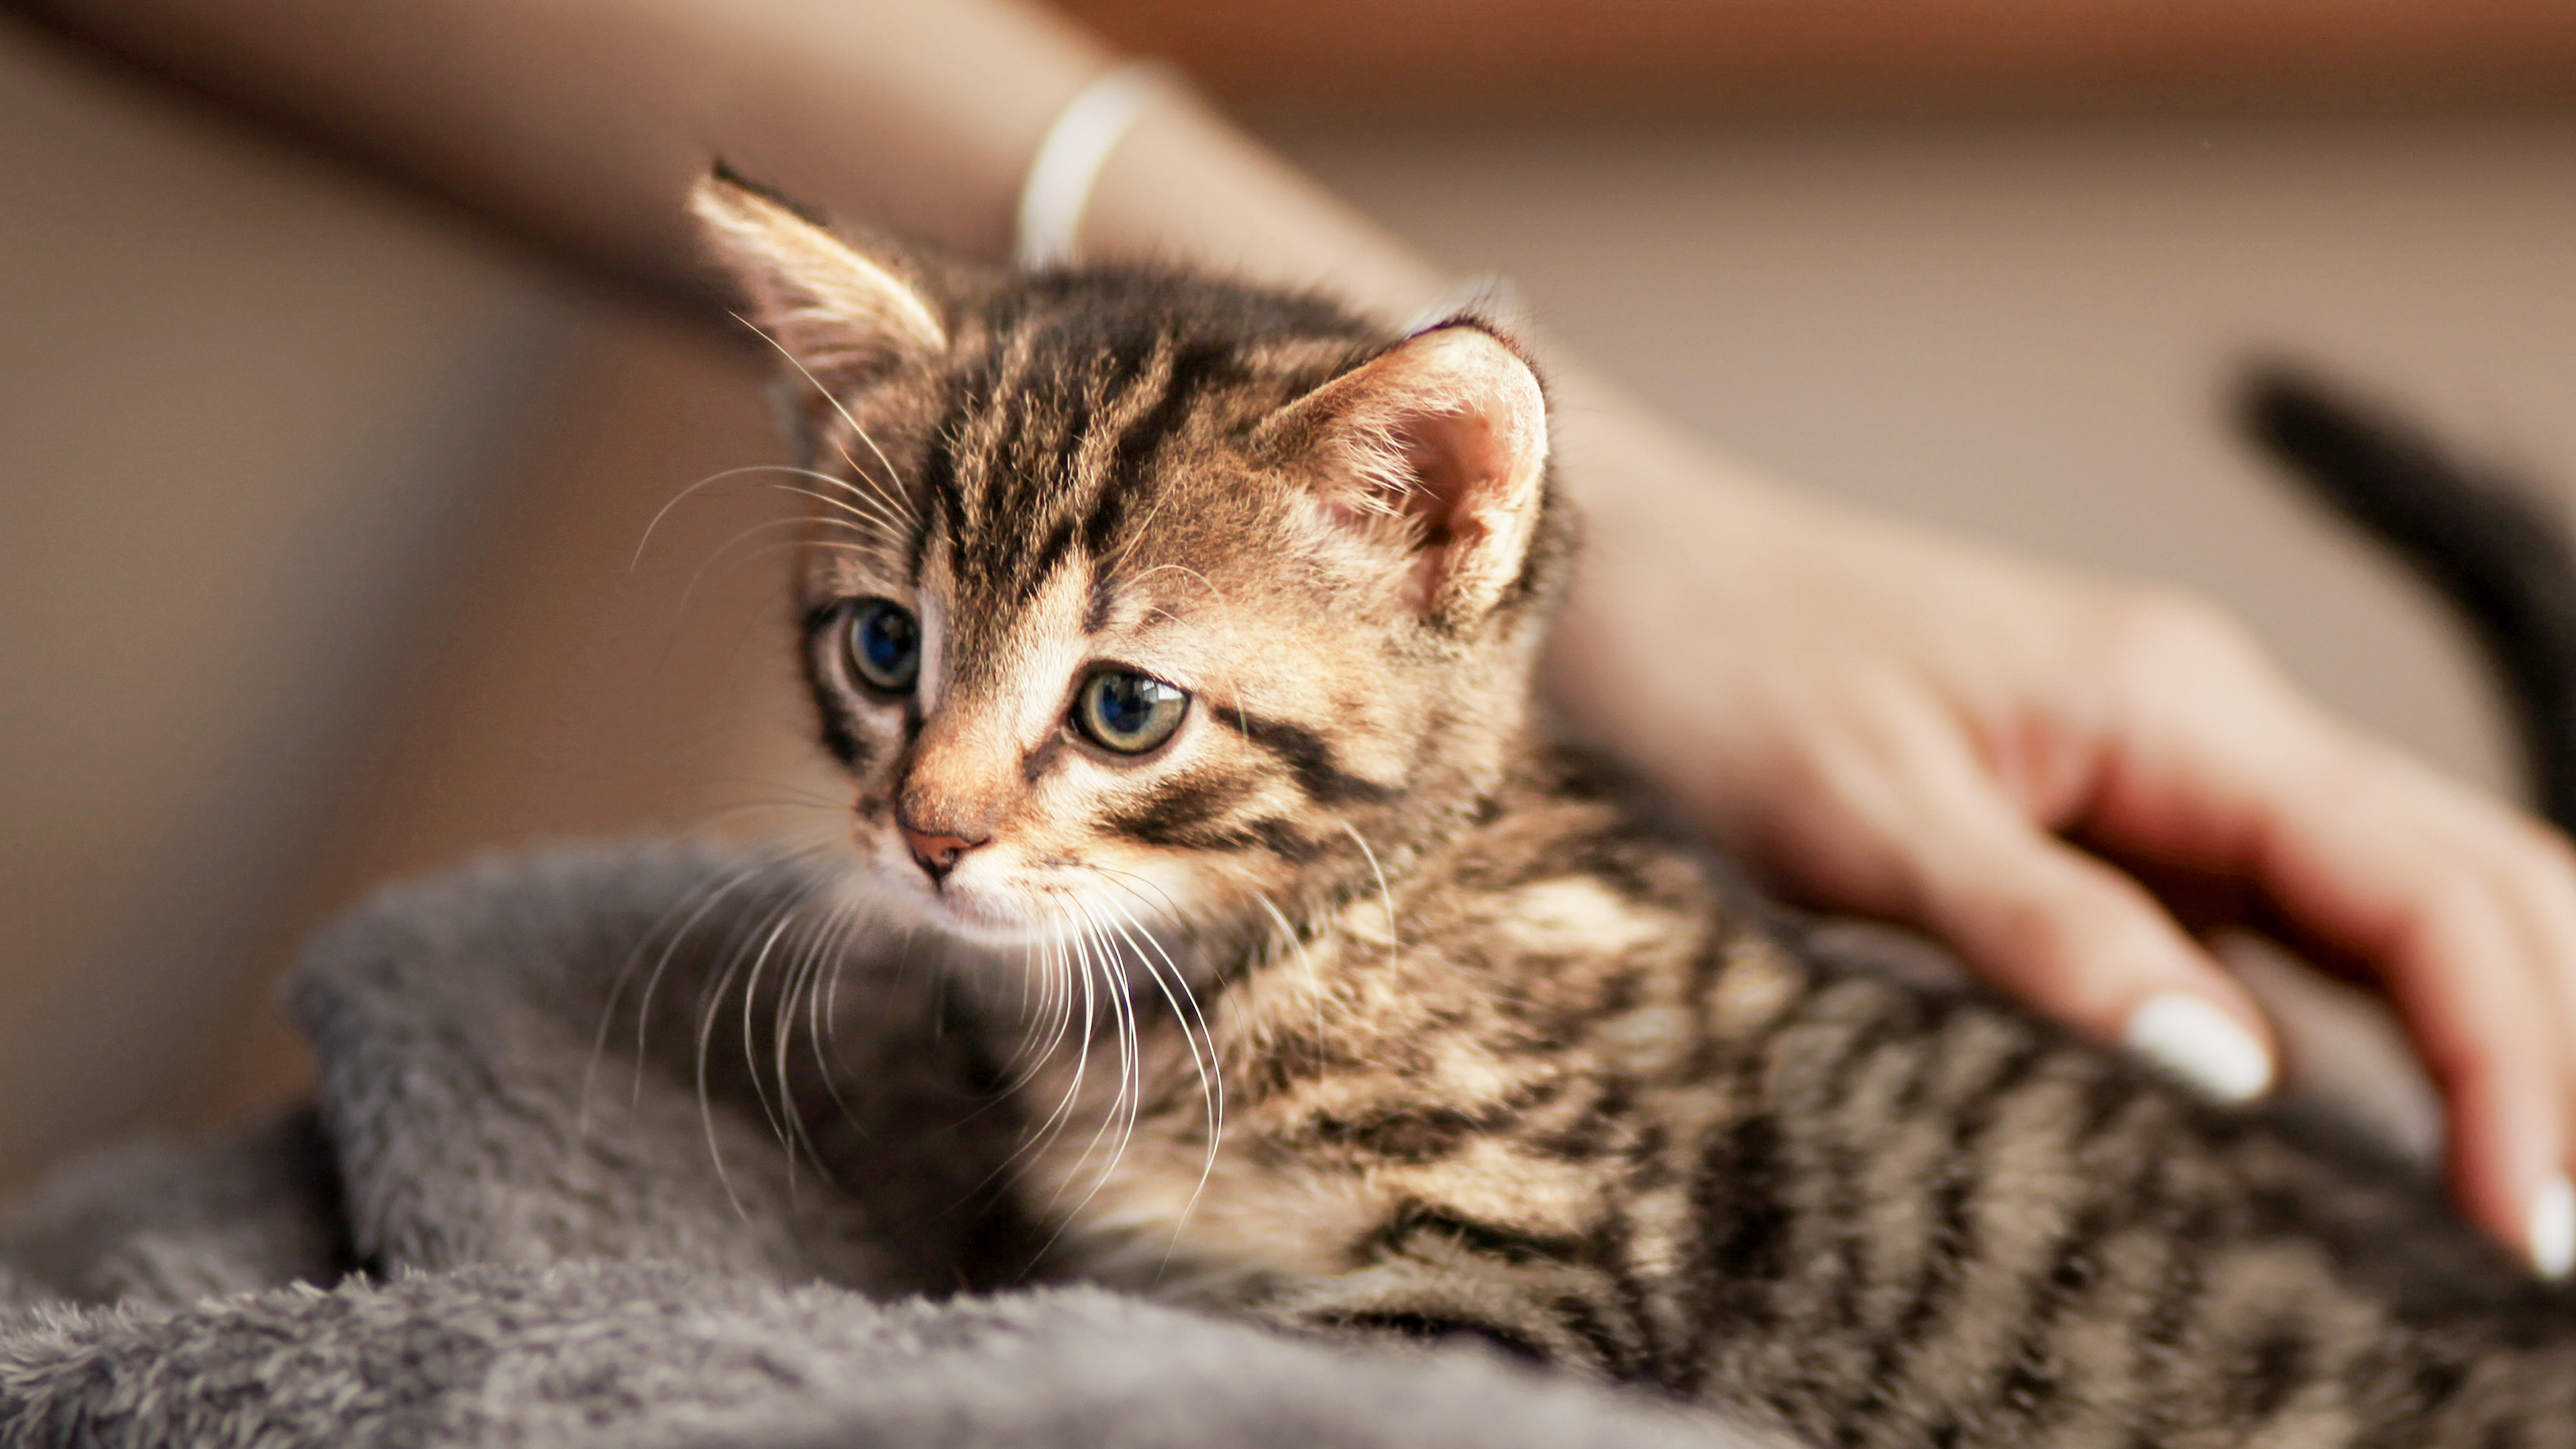 Bengal kitten sitting on a gray blanket being stroked by owner